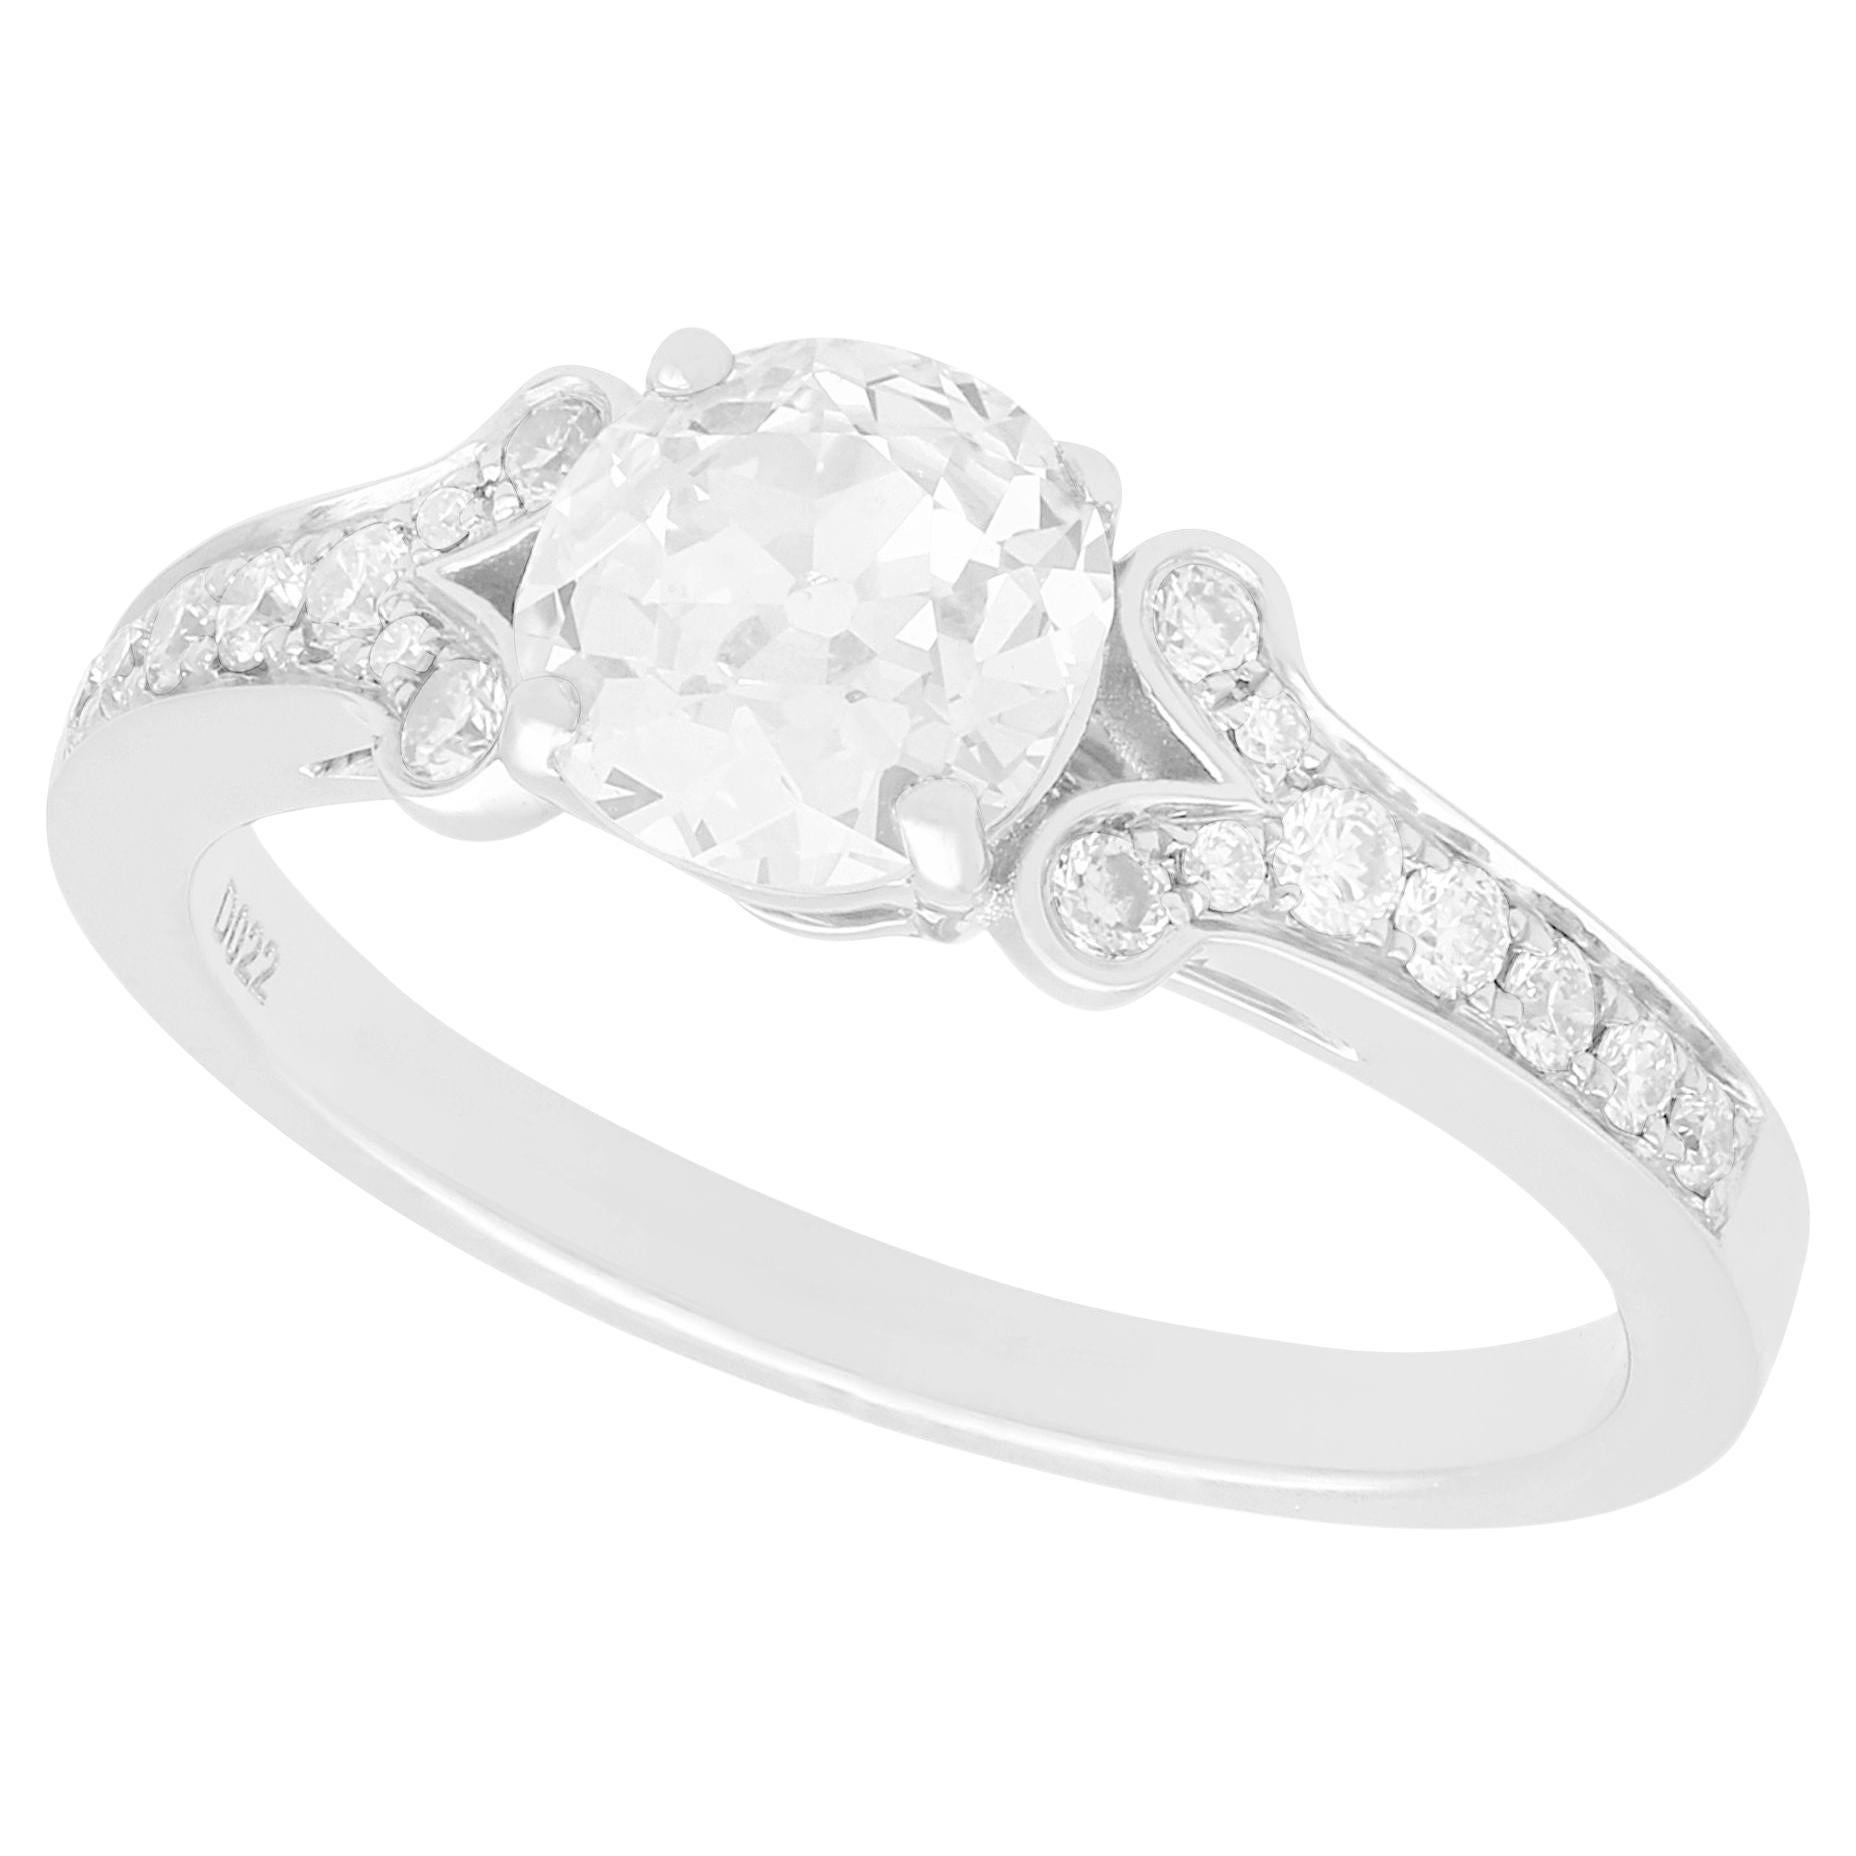 1.42 Carat Diamond and White Gold Solitaire Engagement Ring For Sale